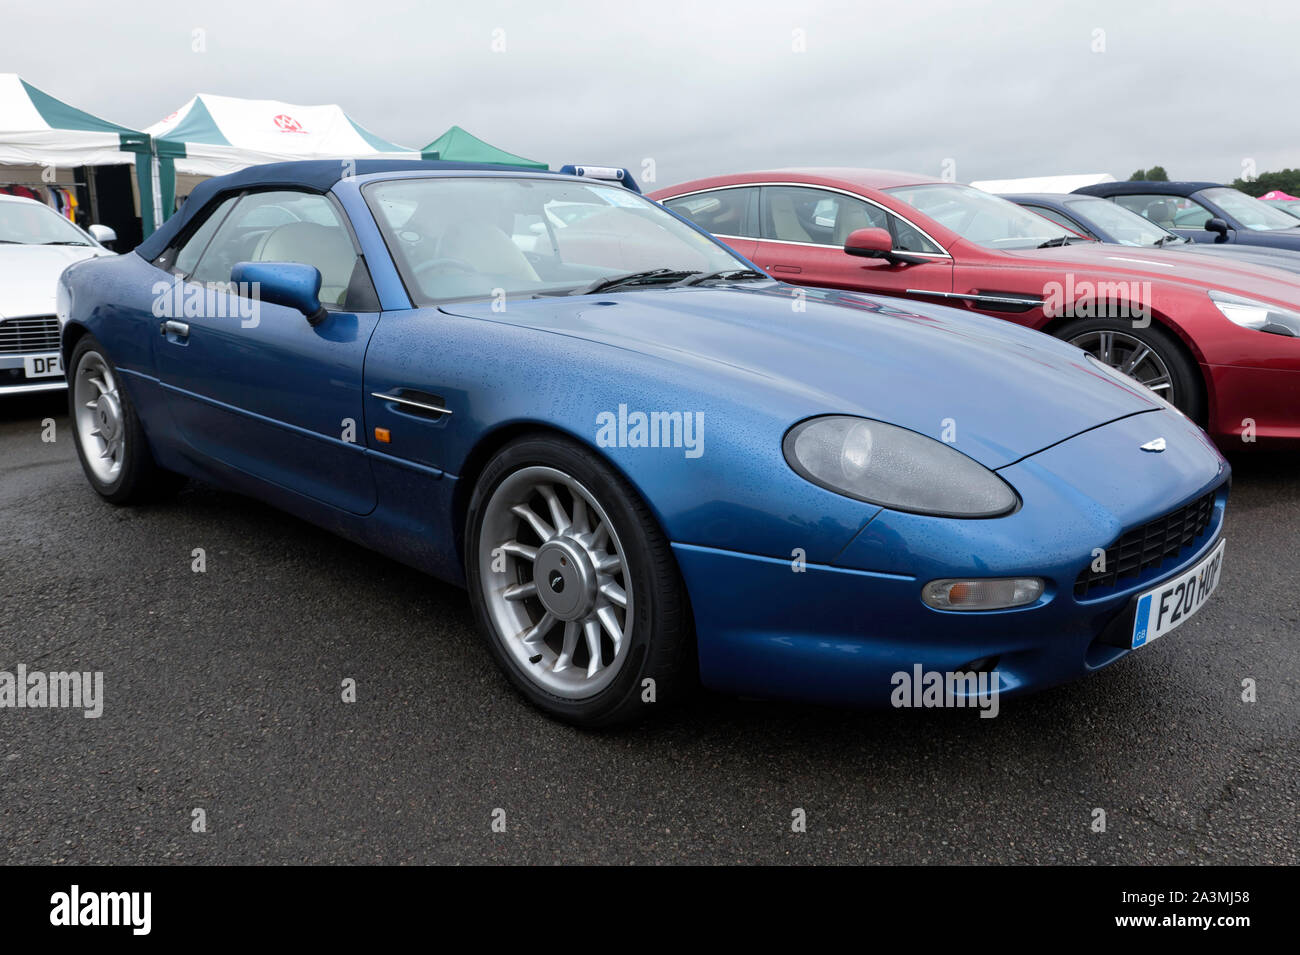 Three-quarters front view of a Blue 1997, Aston Martin DB7, on display at the 2019 Silverstone Classic Stock Photo